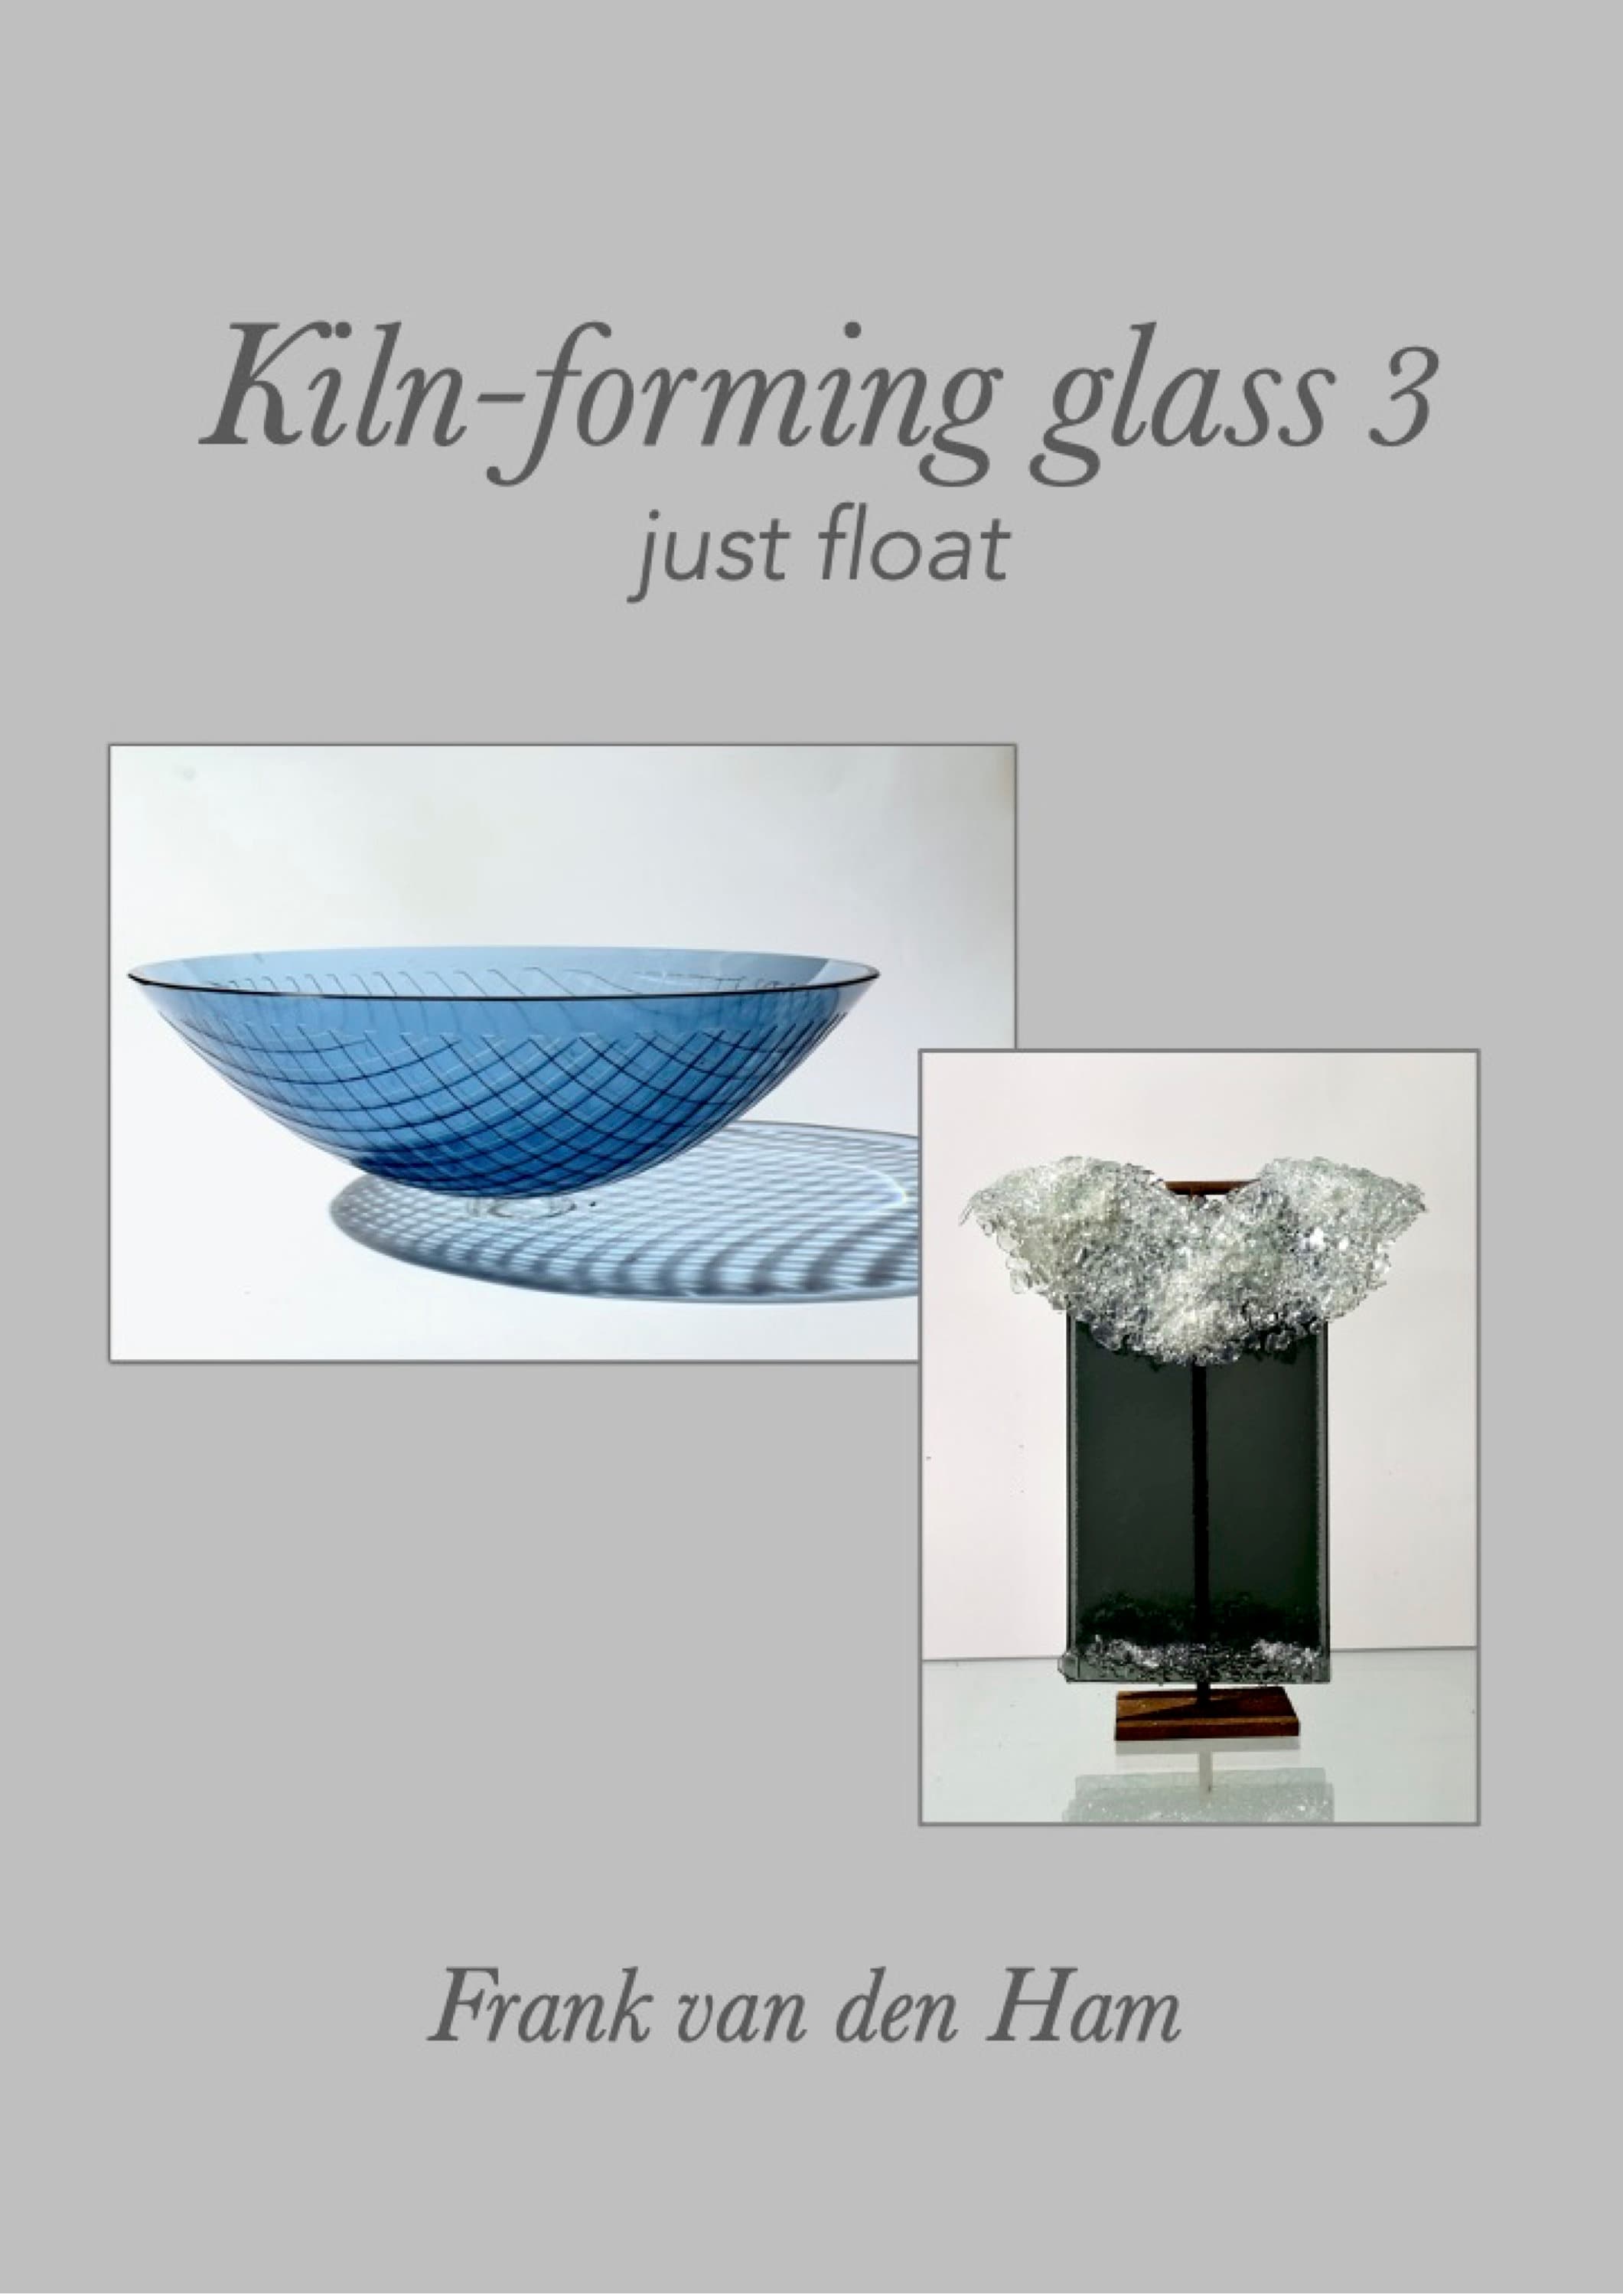 Sheet glass, for kilnforming, fusing, and more